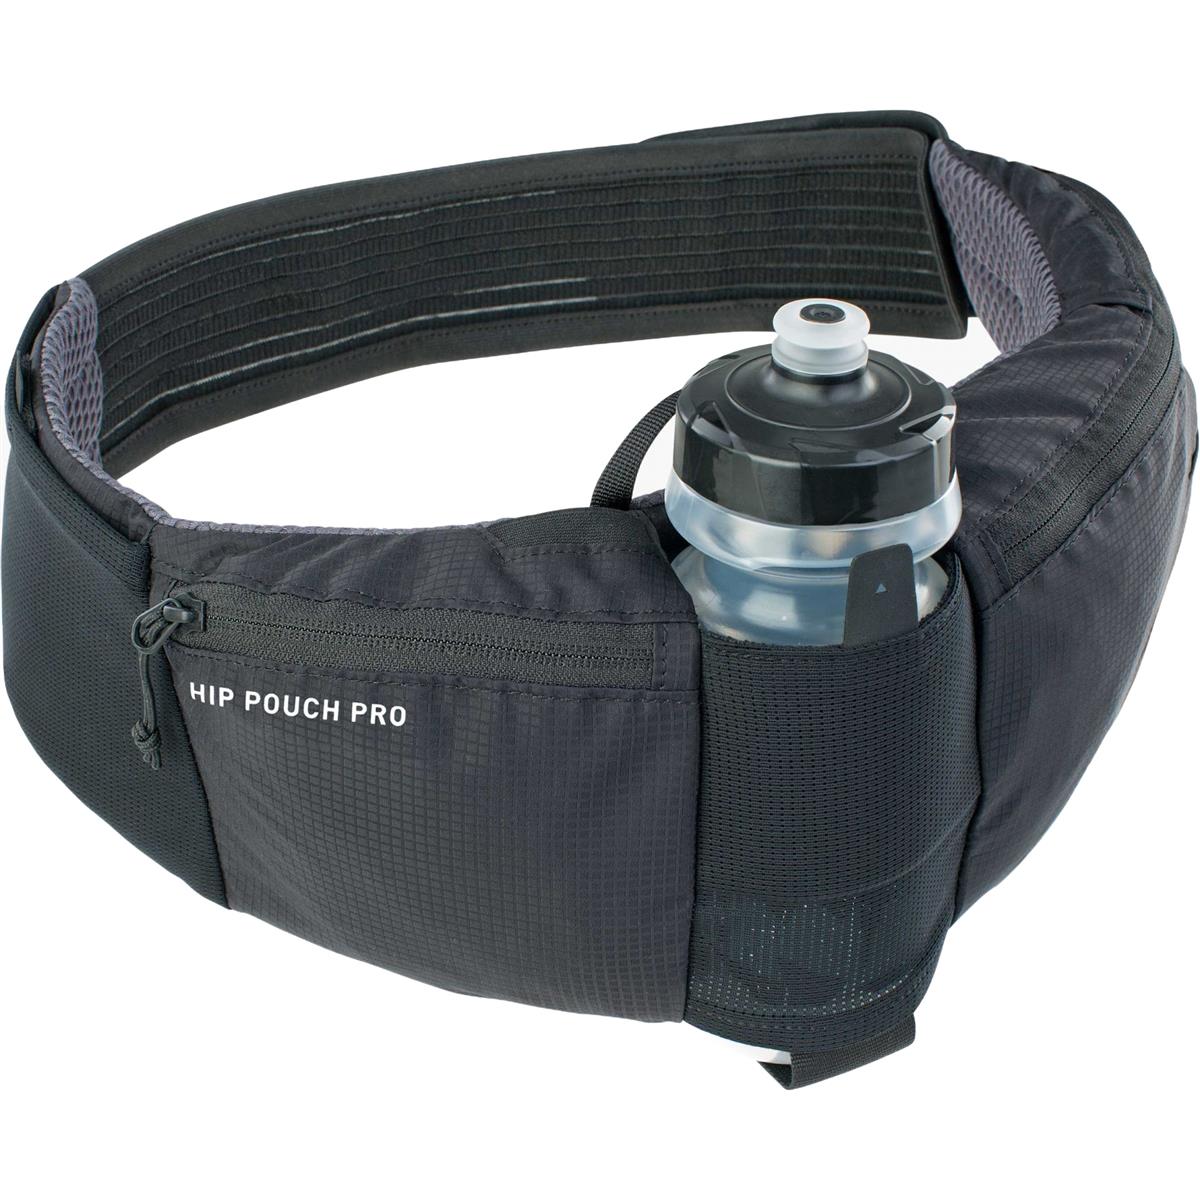 Hip Pouch Pro 1.5lt Black with water bottle 550ml